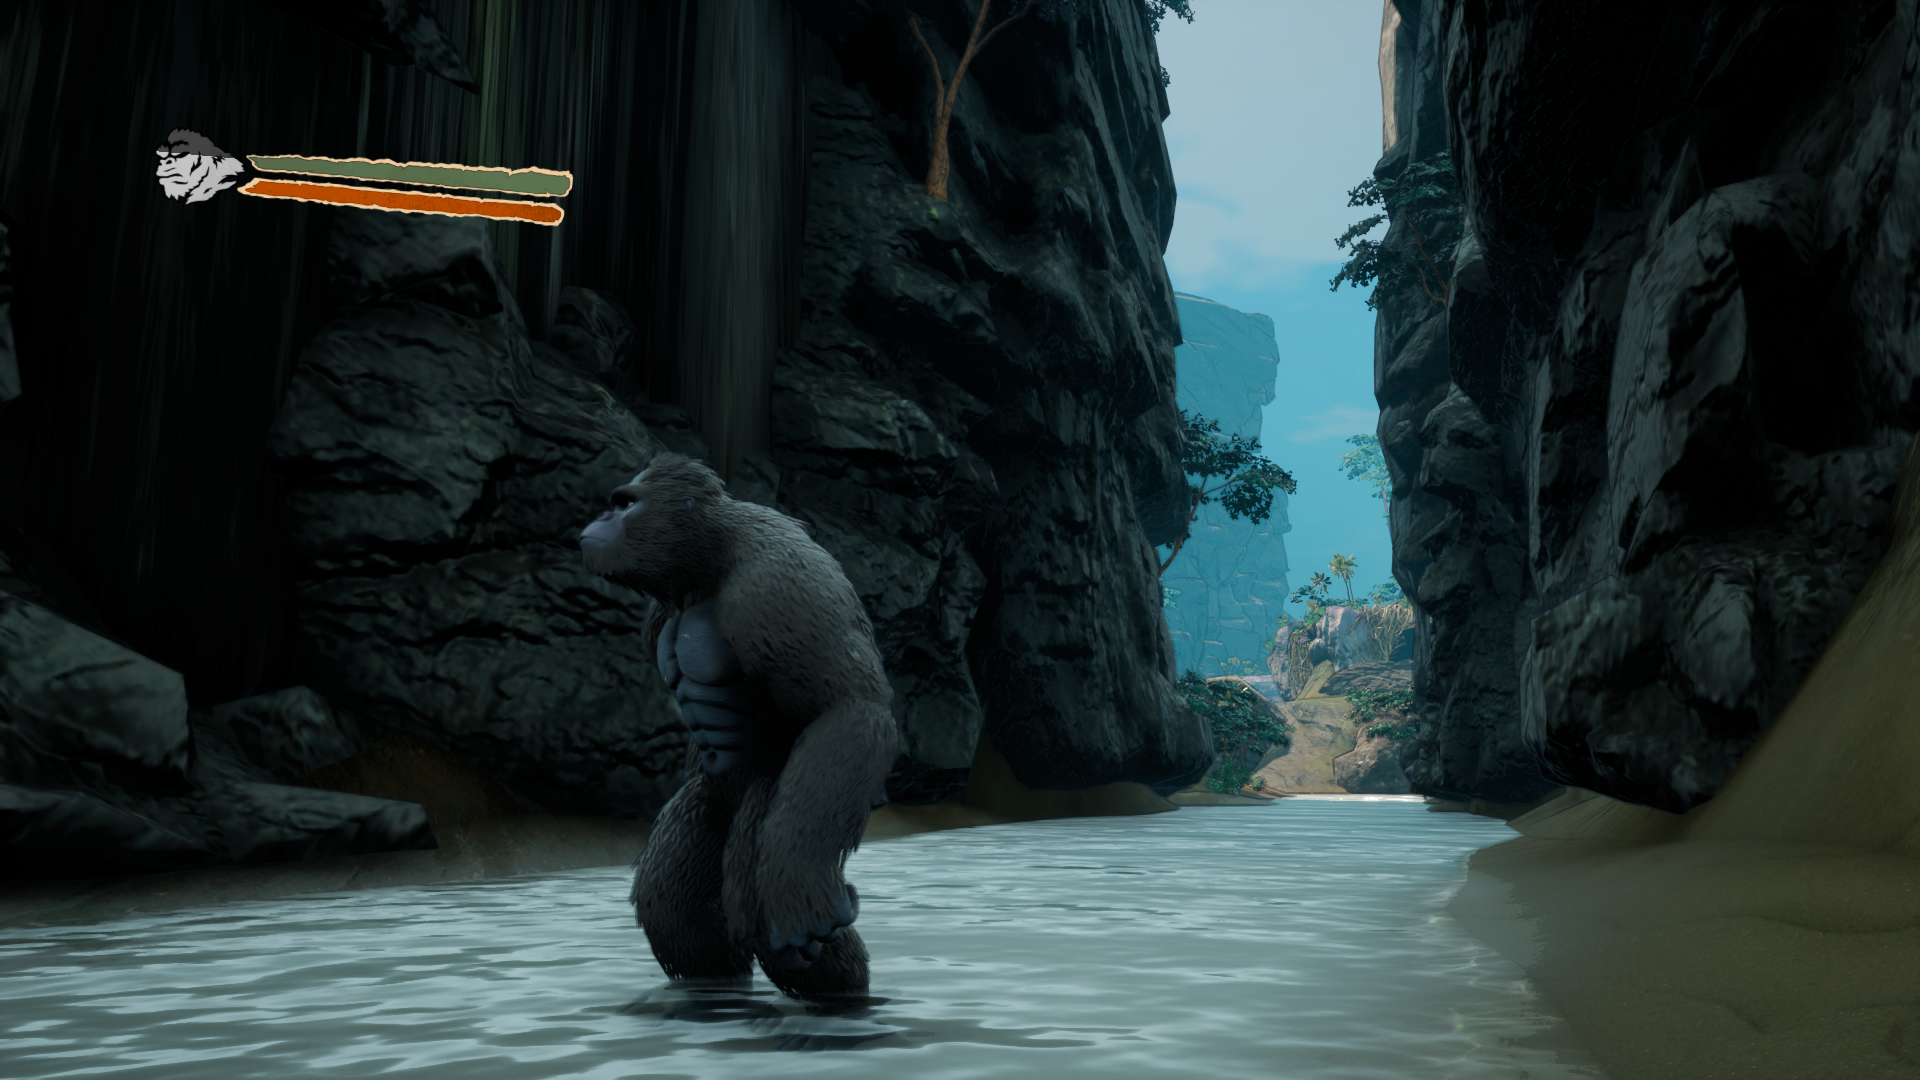 King Kong standing in a river in Skull Island: Rise of Kong.